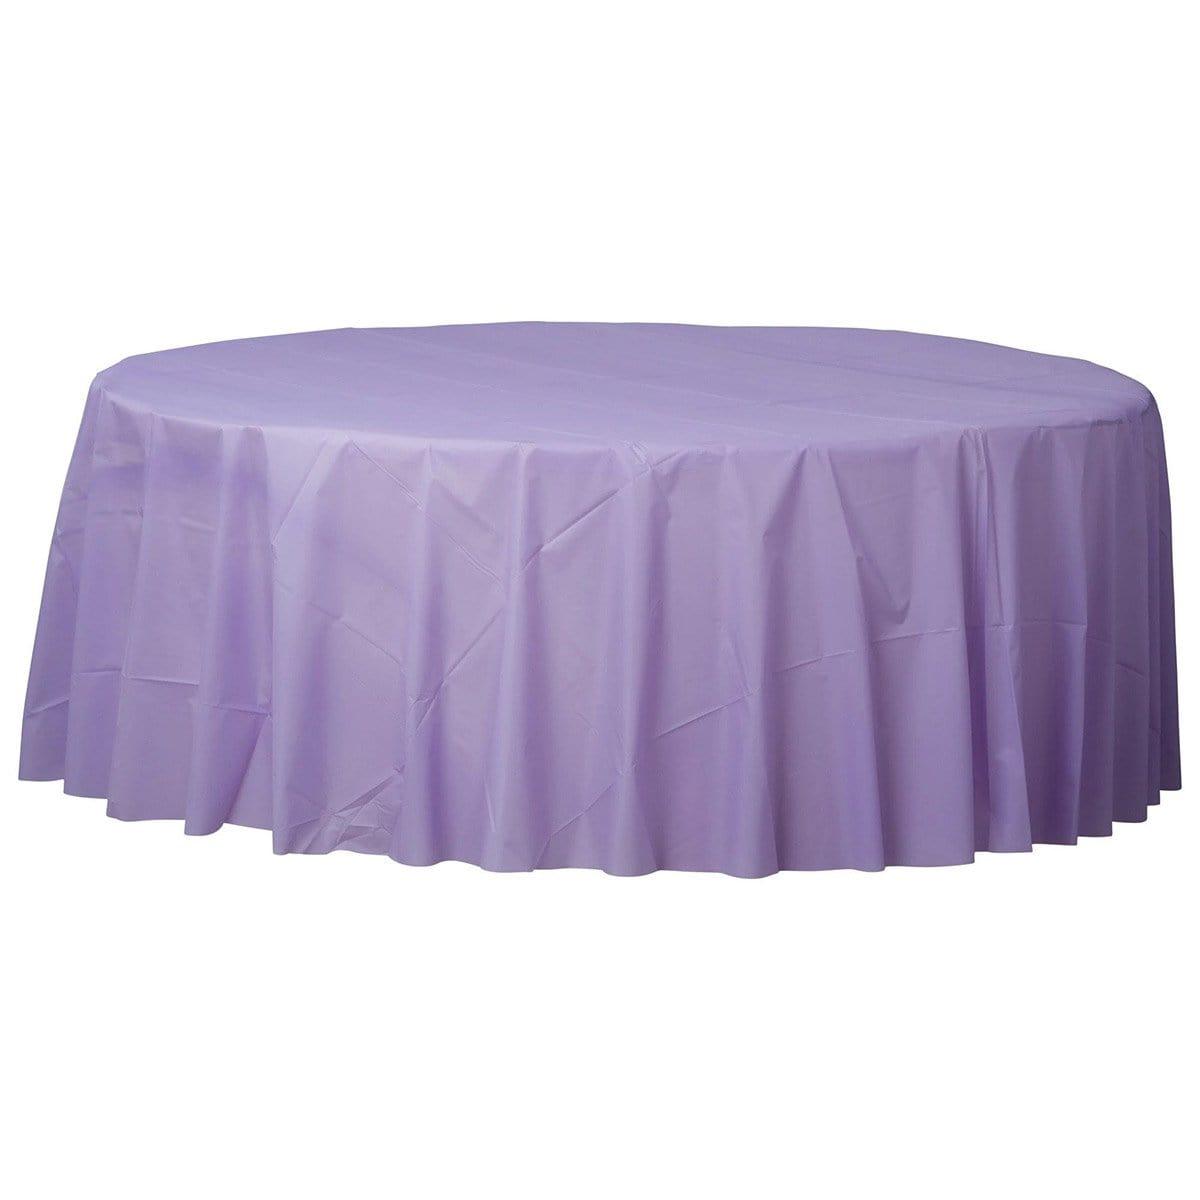 Buy plasticware Lavender Plastic Round Tablecover sold at Party Expert